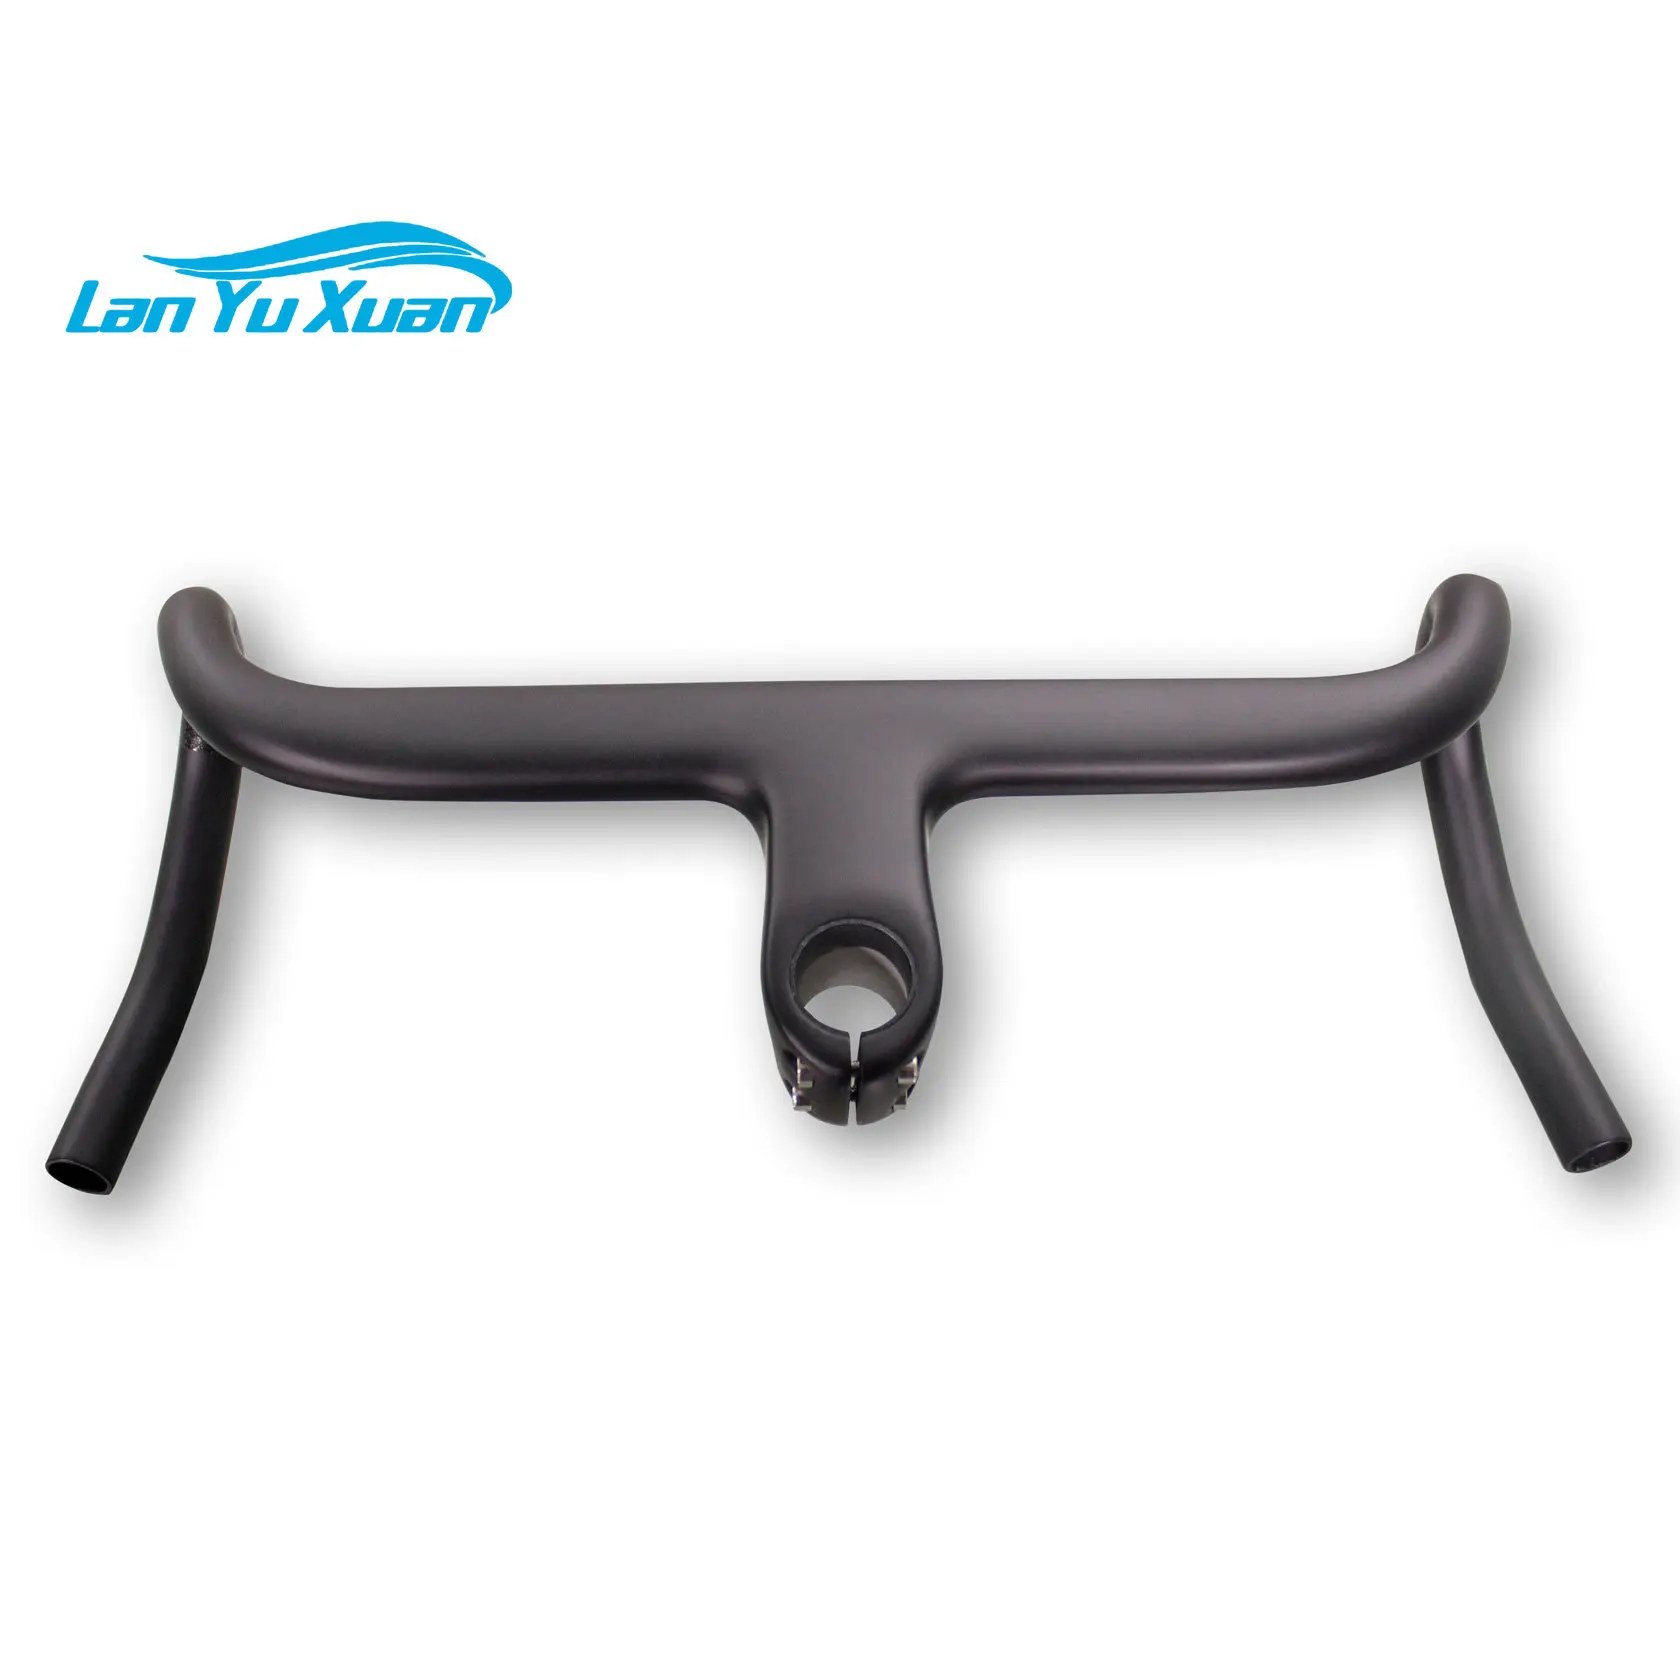 2023 Factory price carbon T800 HMF integrated handlebar designed for gavel bike with internal cable route bicycle parts chinese factory low price deutz engine parts cylinder liner 0425 3772 for bf6m1013 diesel engine